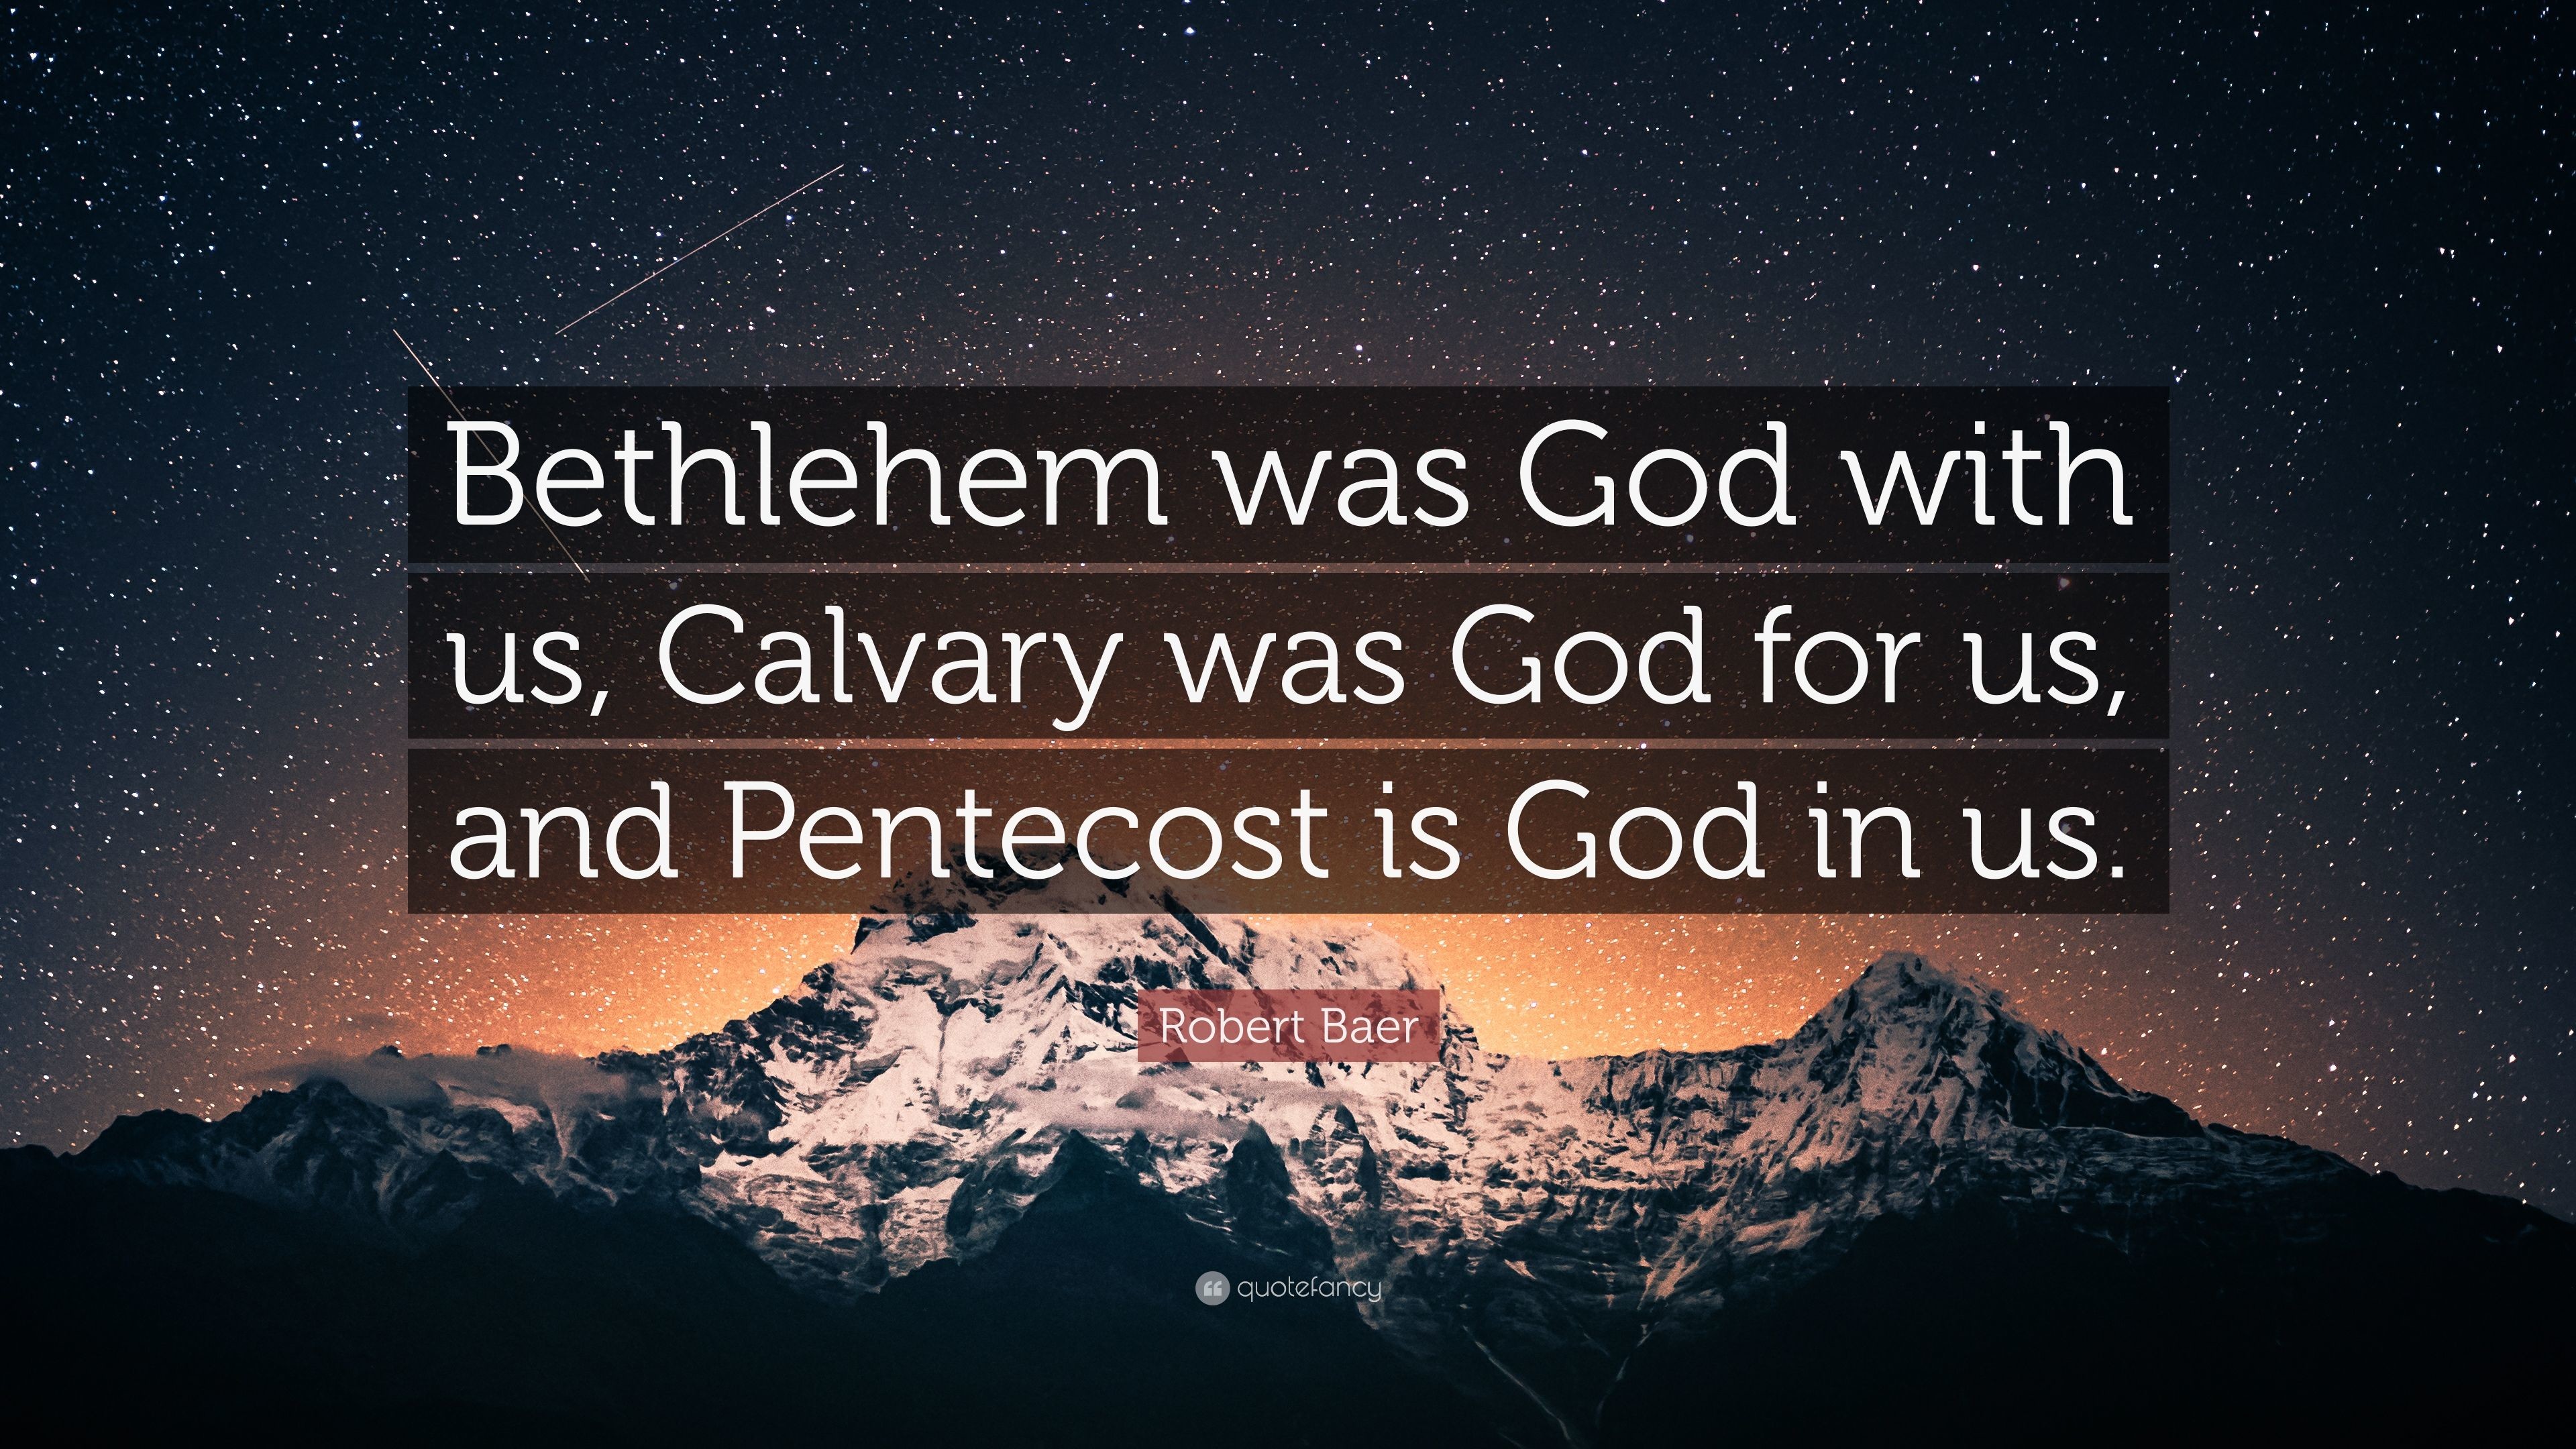 3840x2160 Robert Baer Quote: “Bethlehem was God with us, Calvary was God for us